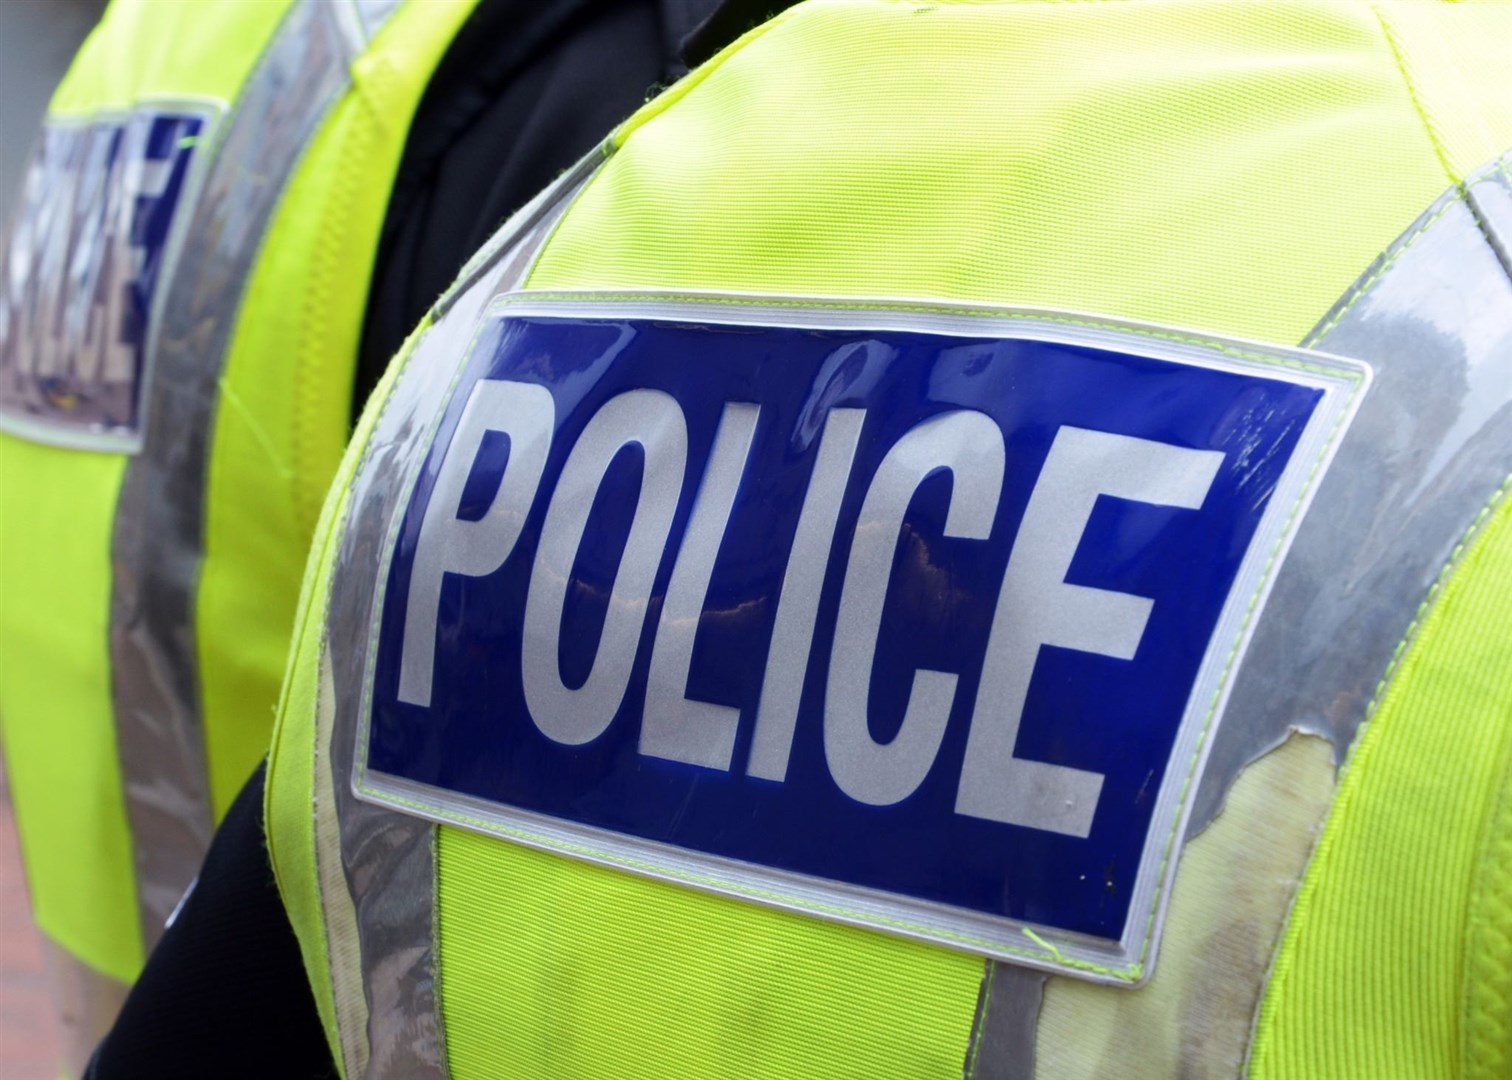 Police have issued an appeal for information after a woman was hit by a van in Dingwall.